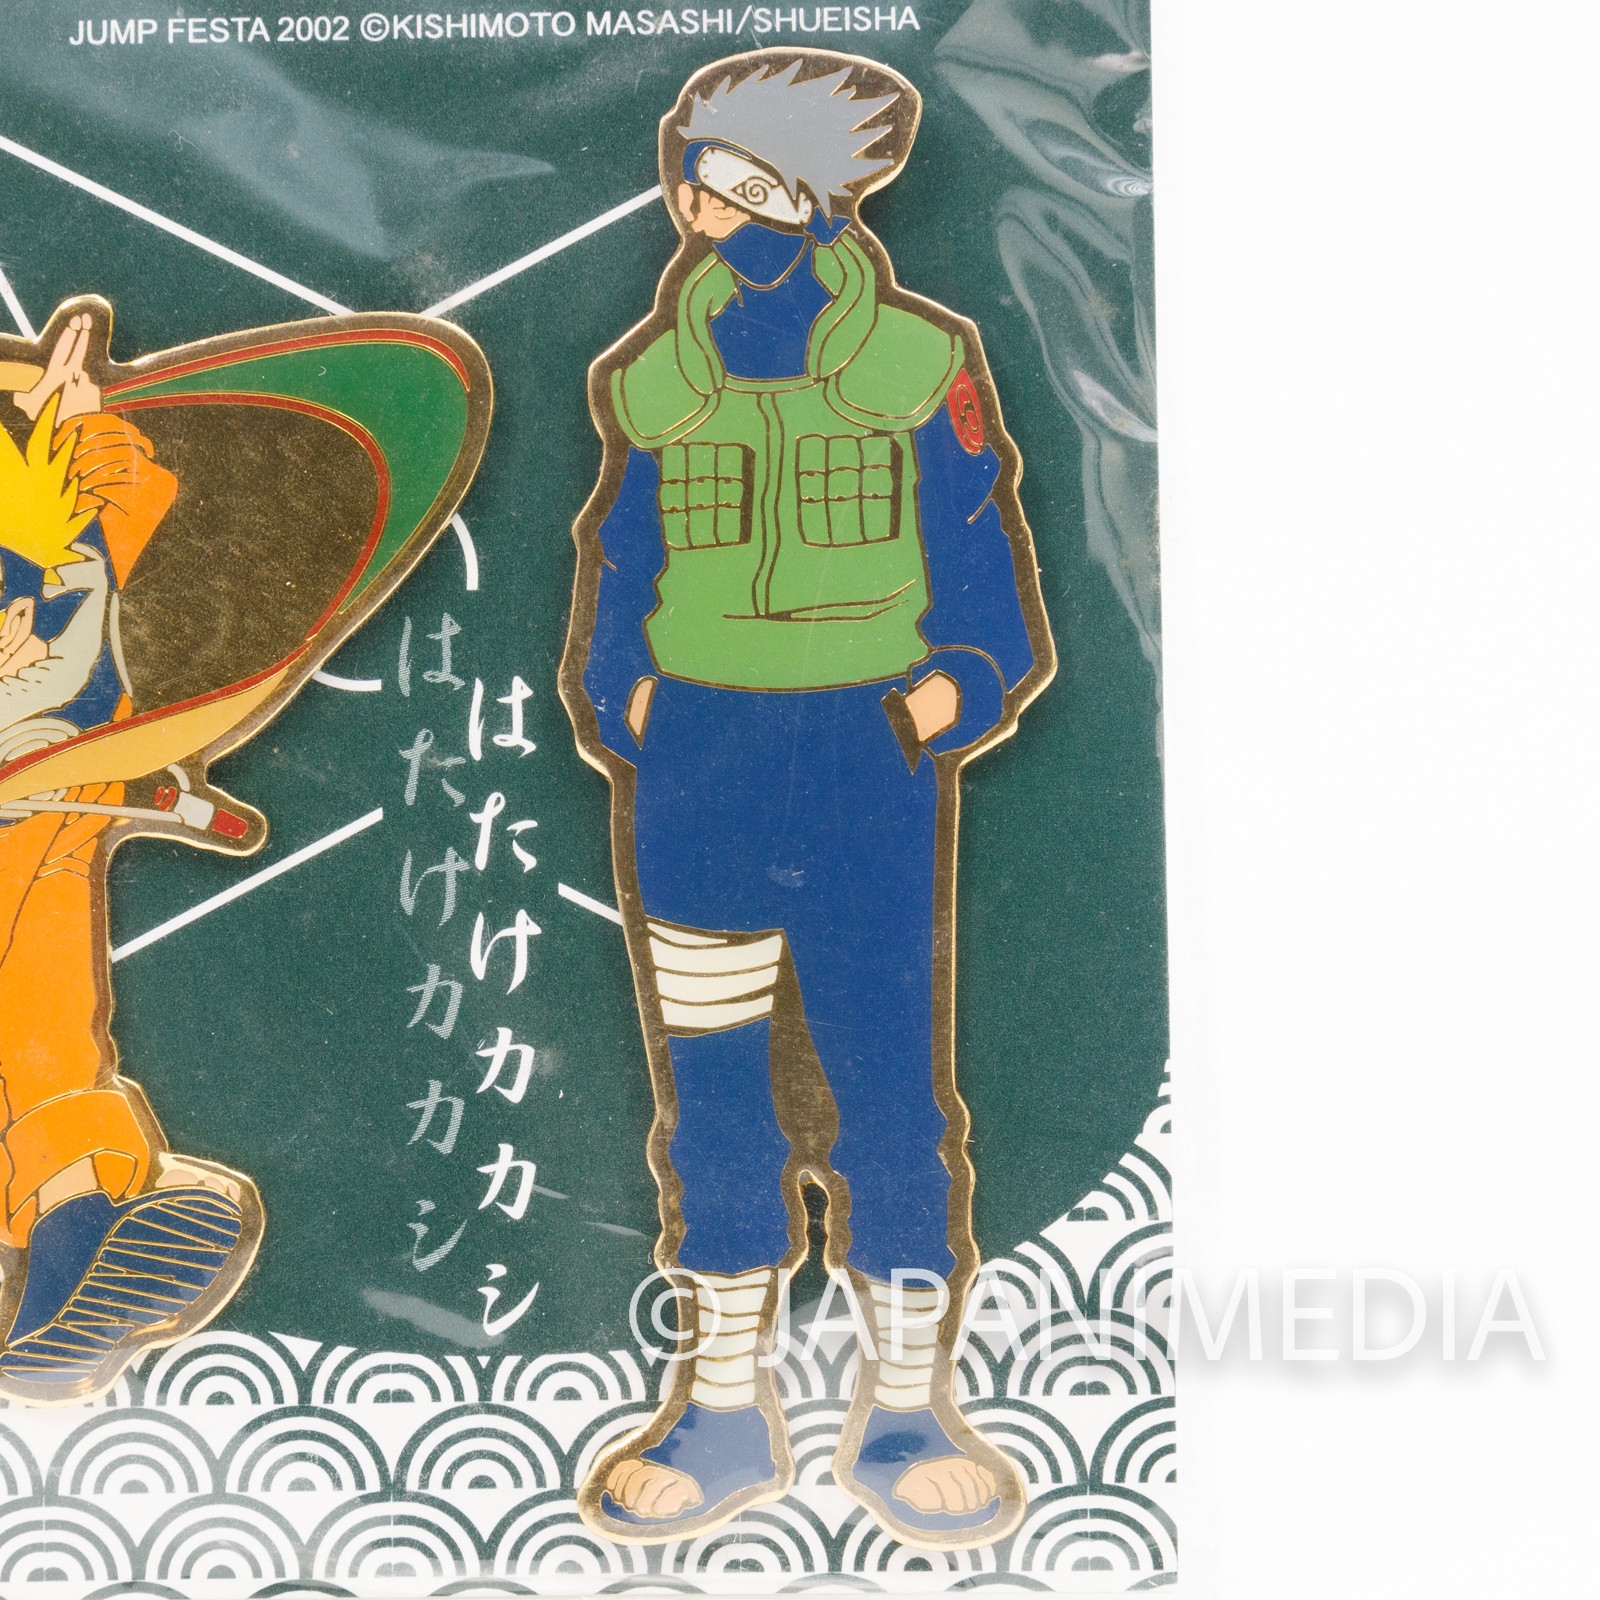 Anime Embroidery Naruto Chibi High Punch - A.G.E Store